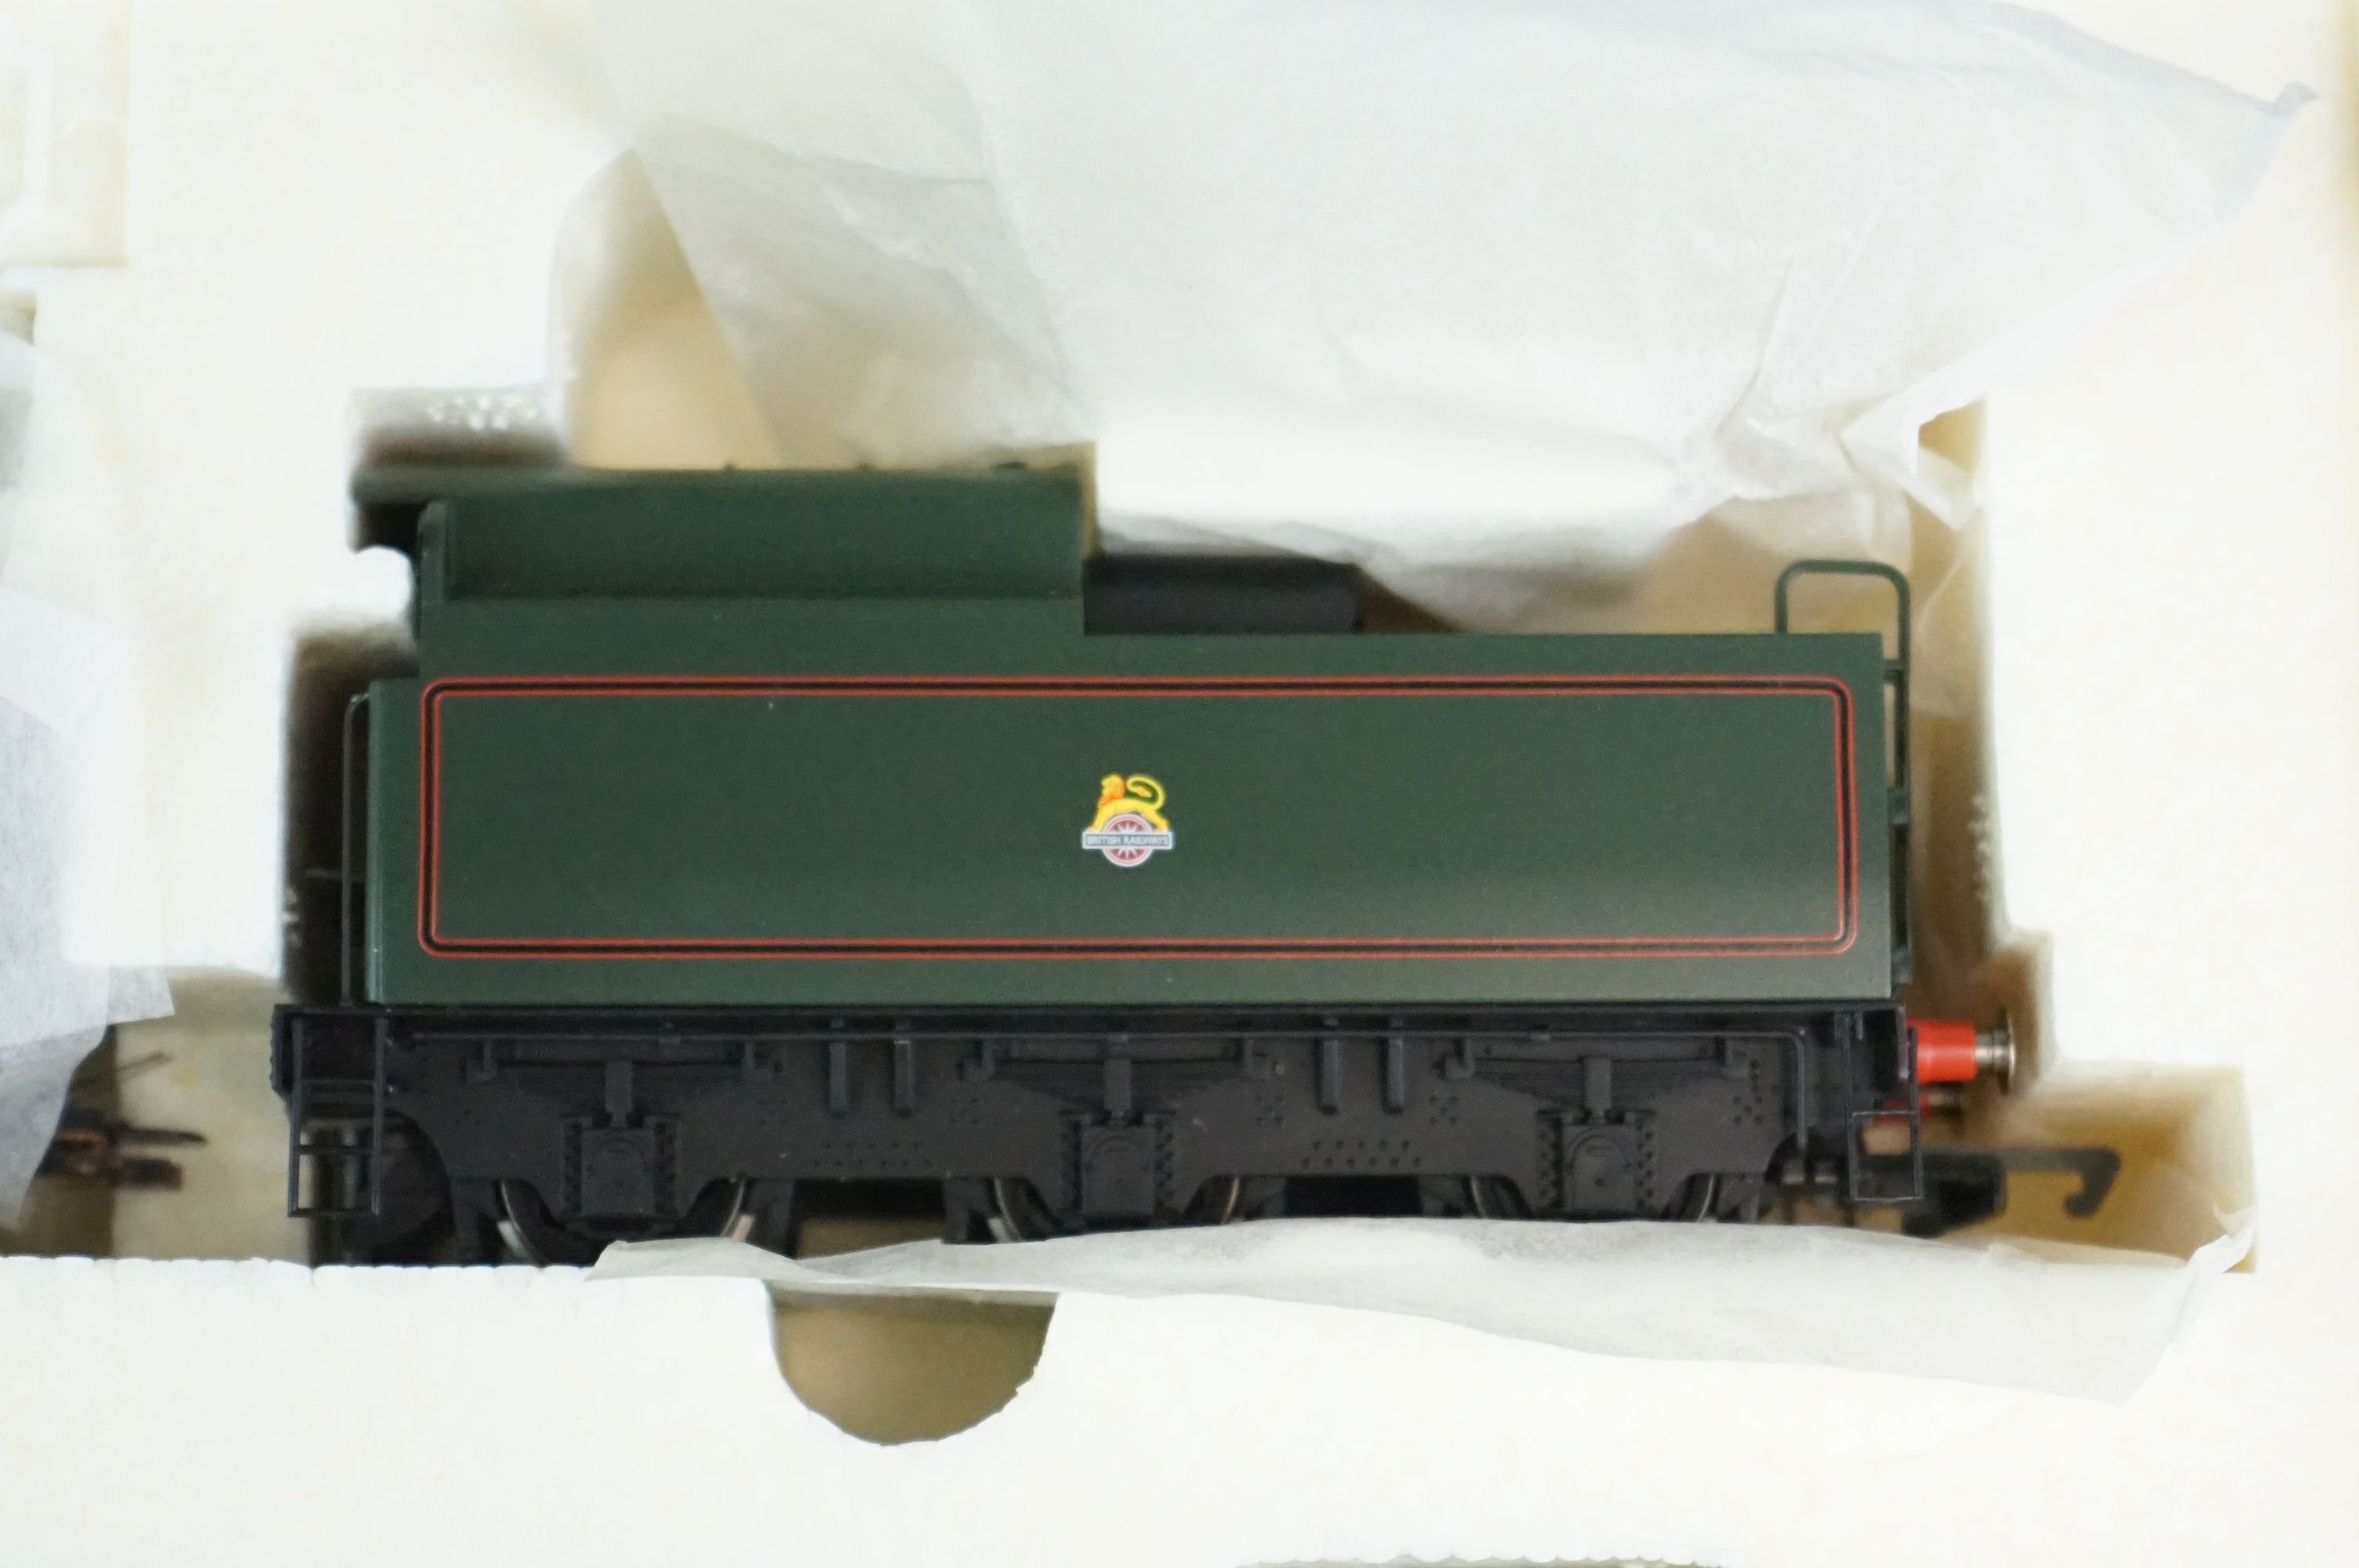 Boxed Hornby OO gauge R2300 Bournemouth Belle Train Pack complete with Merchant Class locomotive, - Image 4 of 5